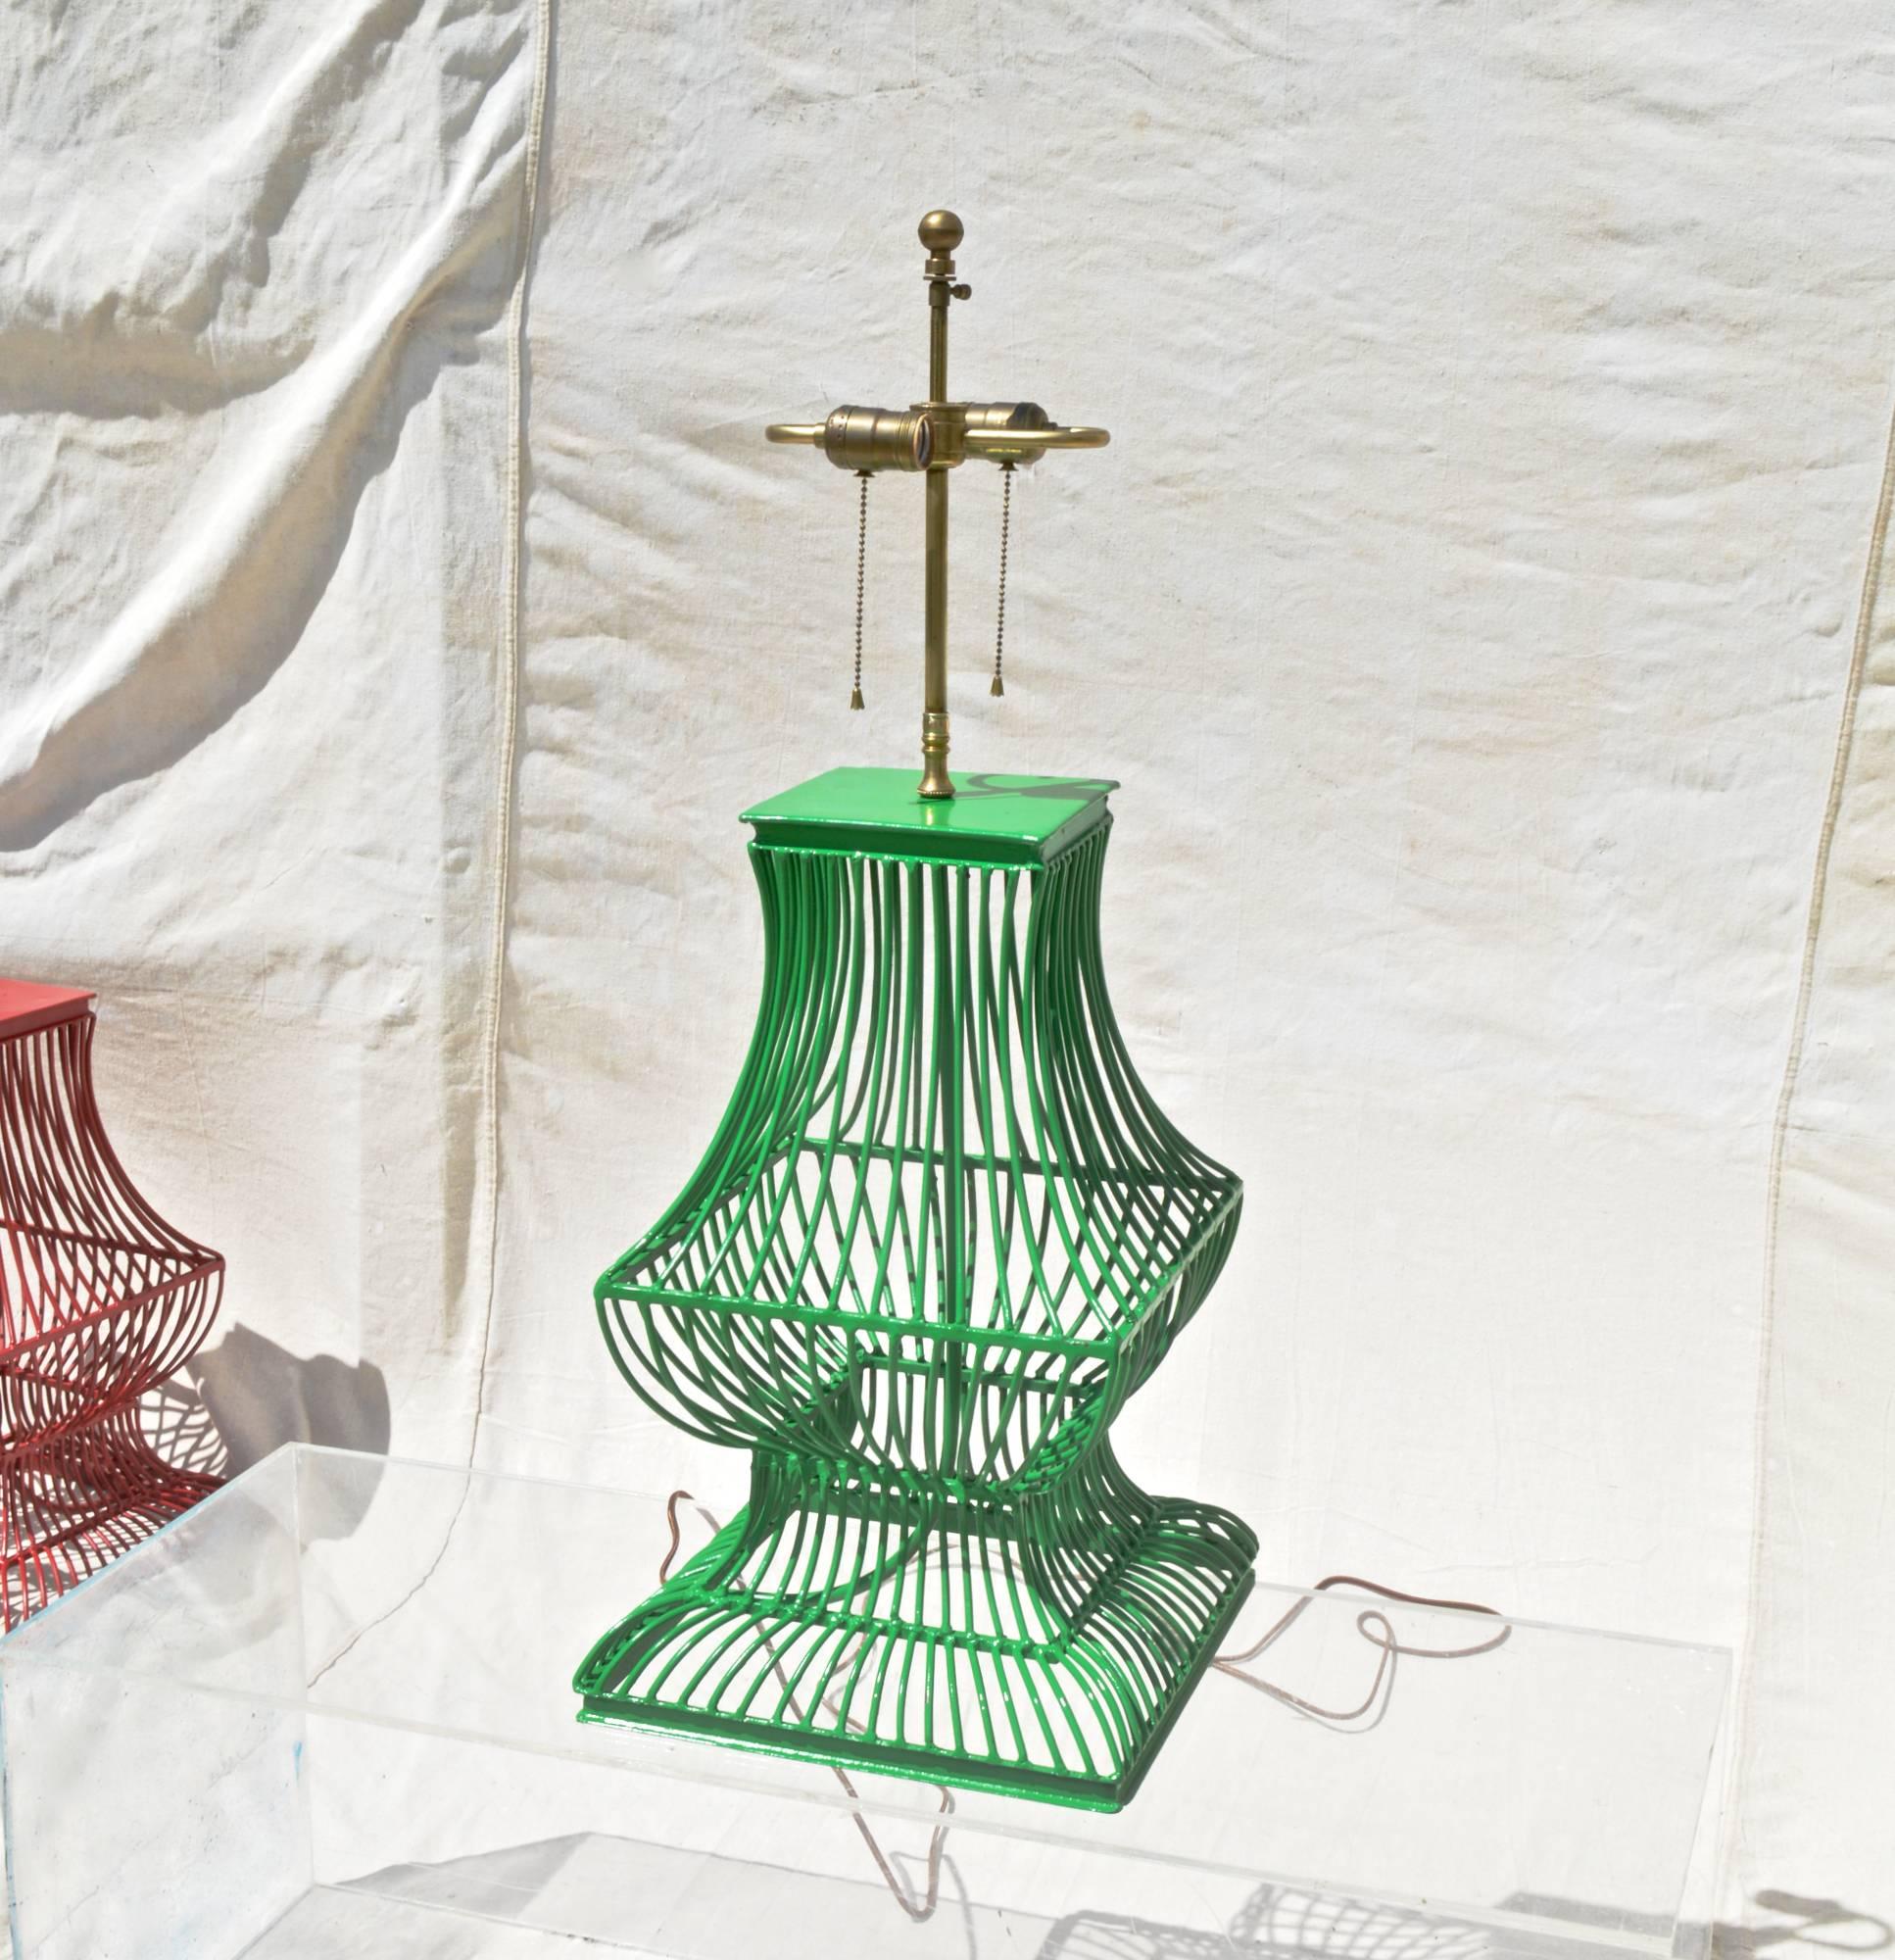 Metal birdcage form lamp of rather large scale. The industrial styled light is artisan made and was hand welded. Recent Spring green paint finish is of a soft gloss. Lamp has just been rewired and is outfitted with a high quality brass double socket